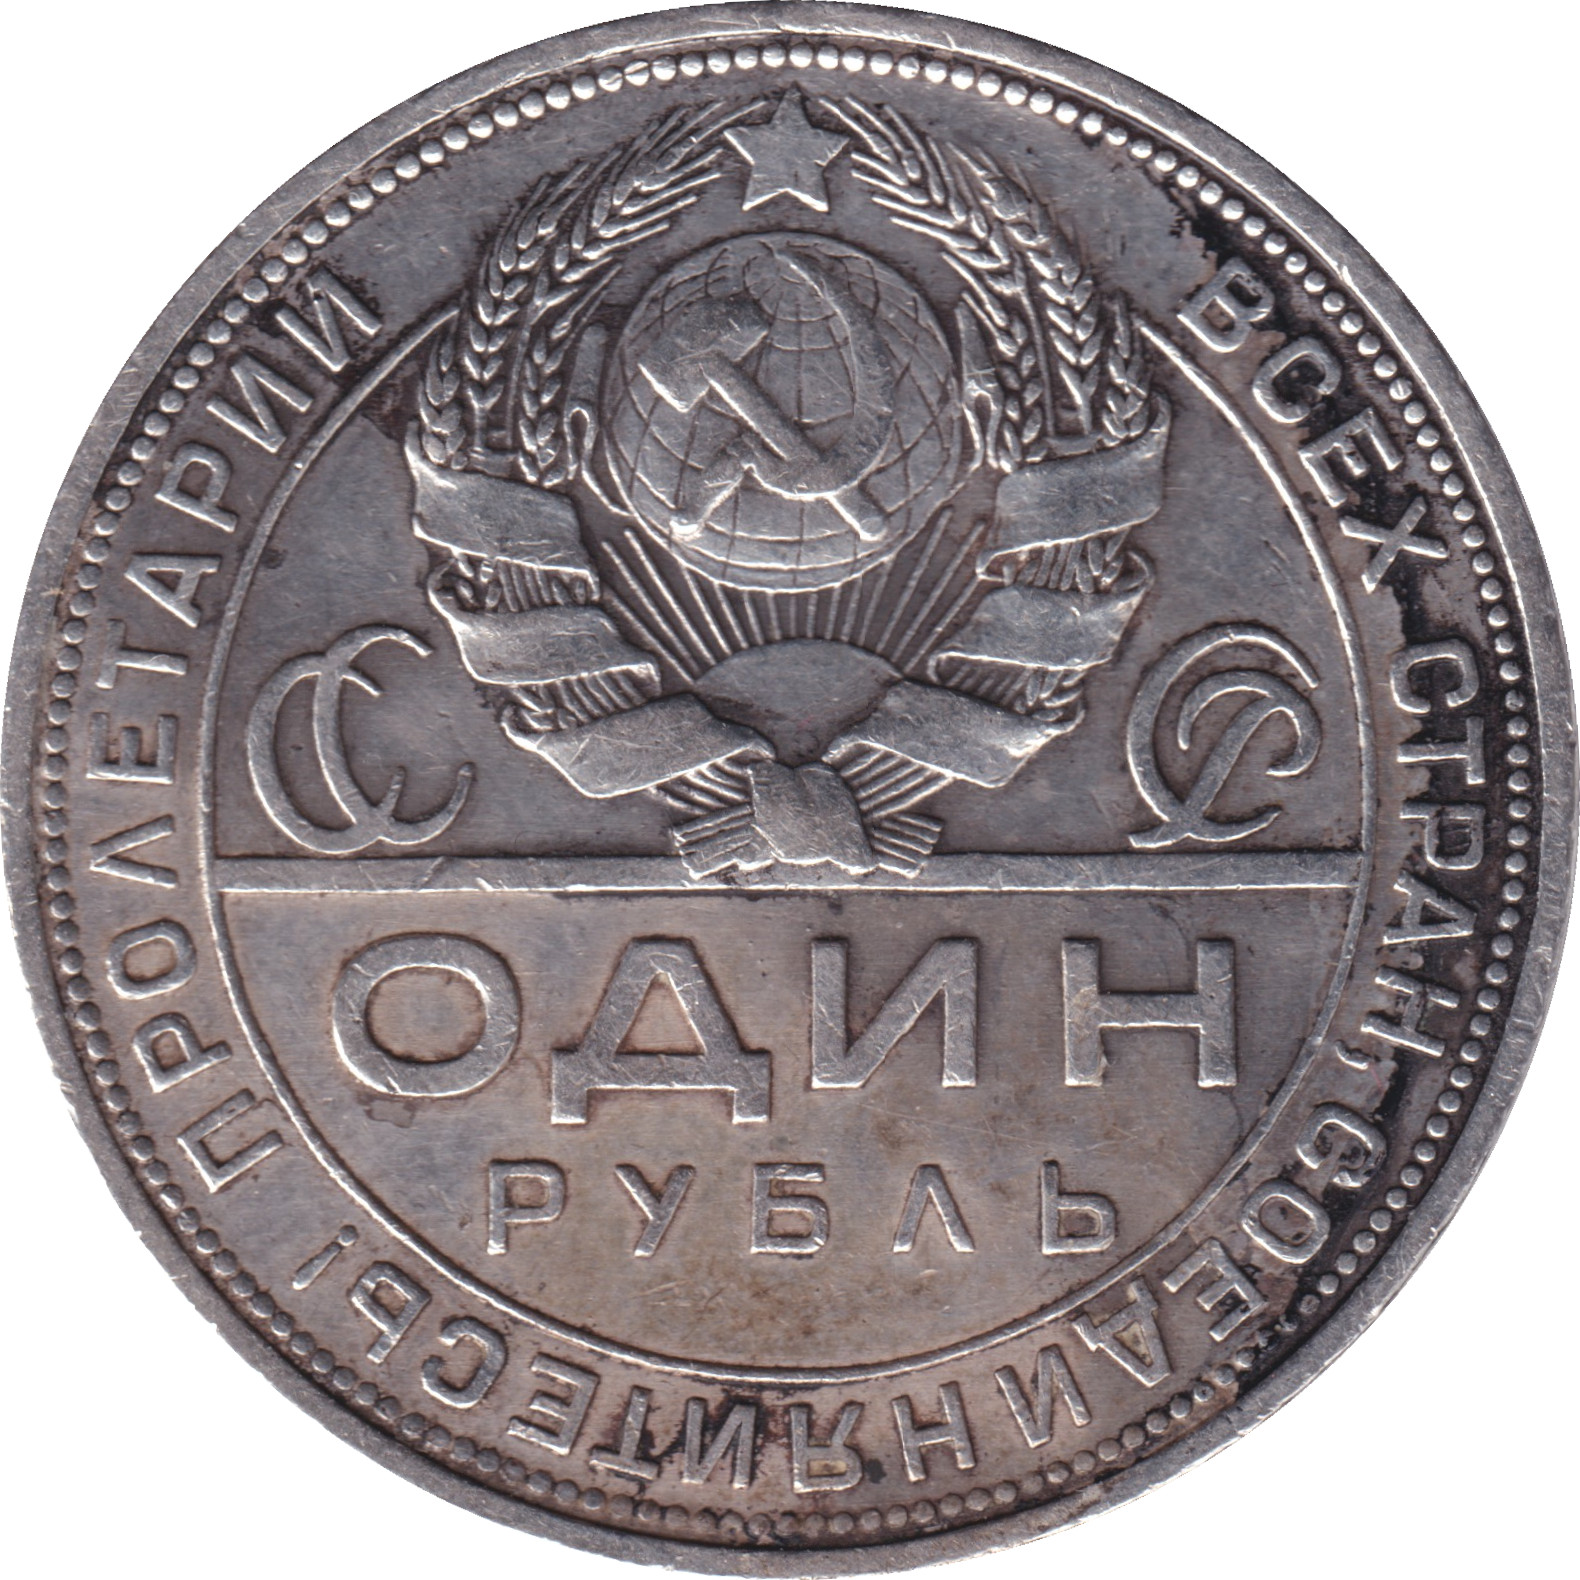 1 ruble - Emblem with 7 ribbons